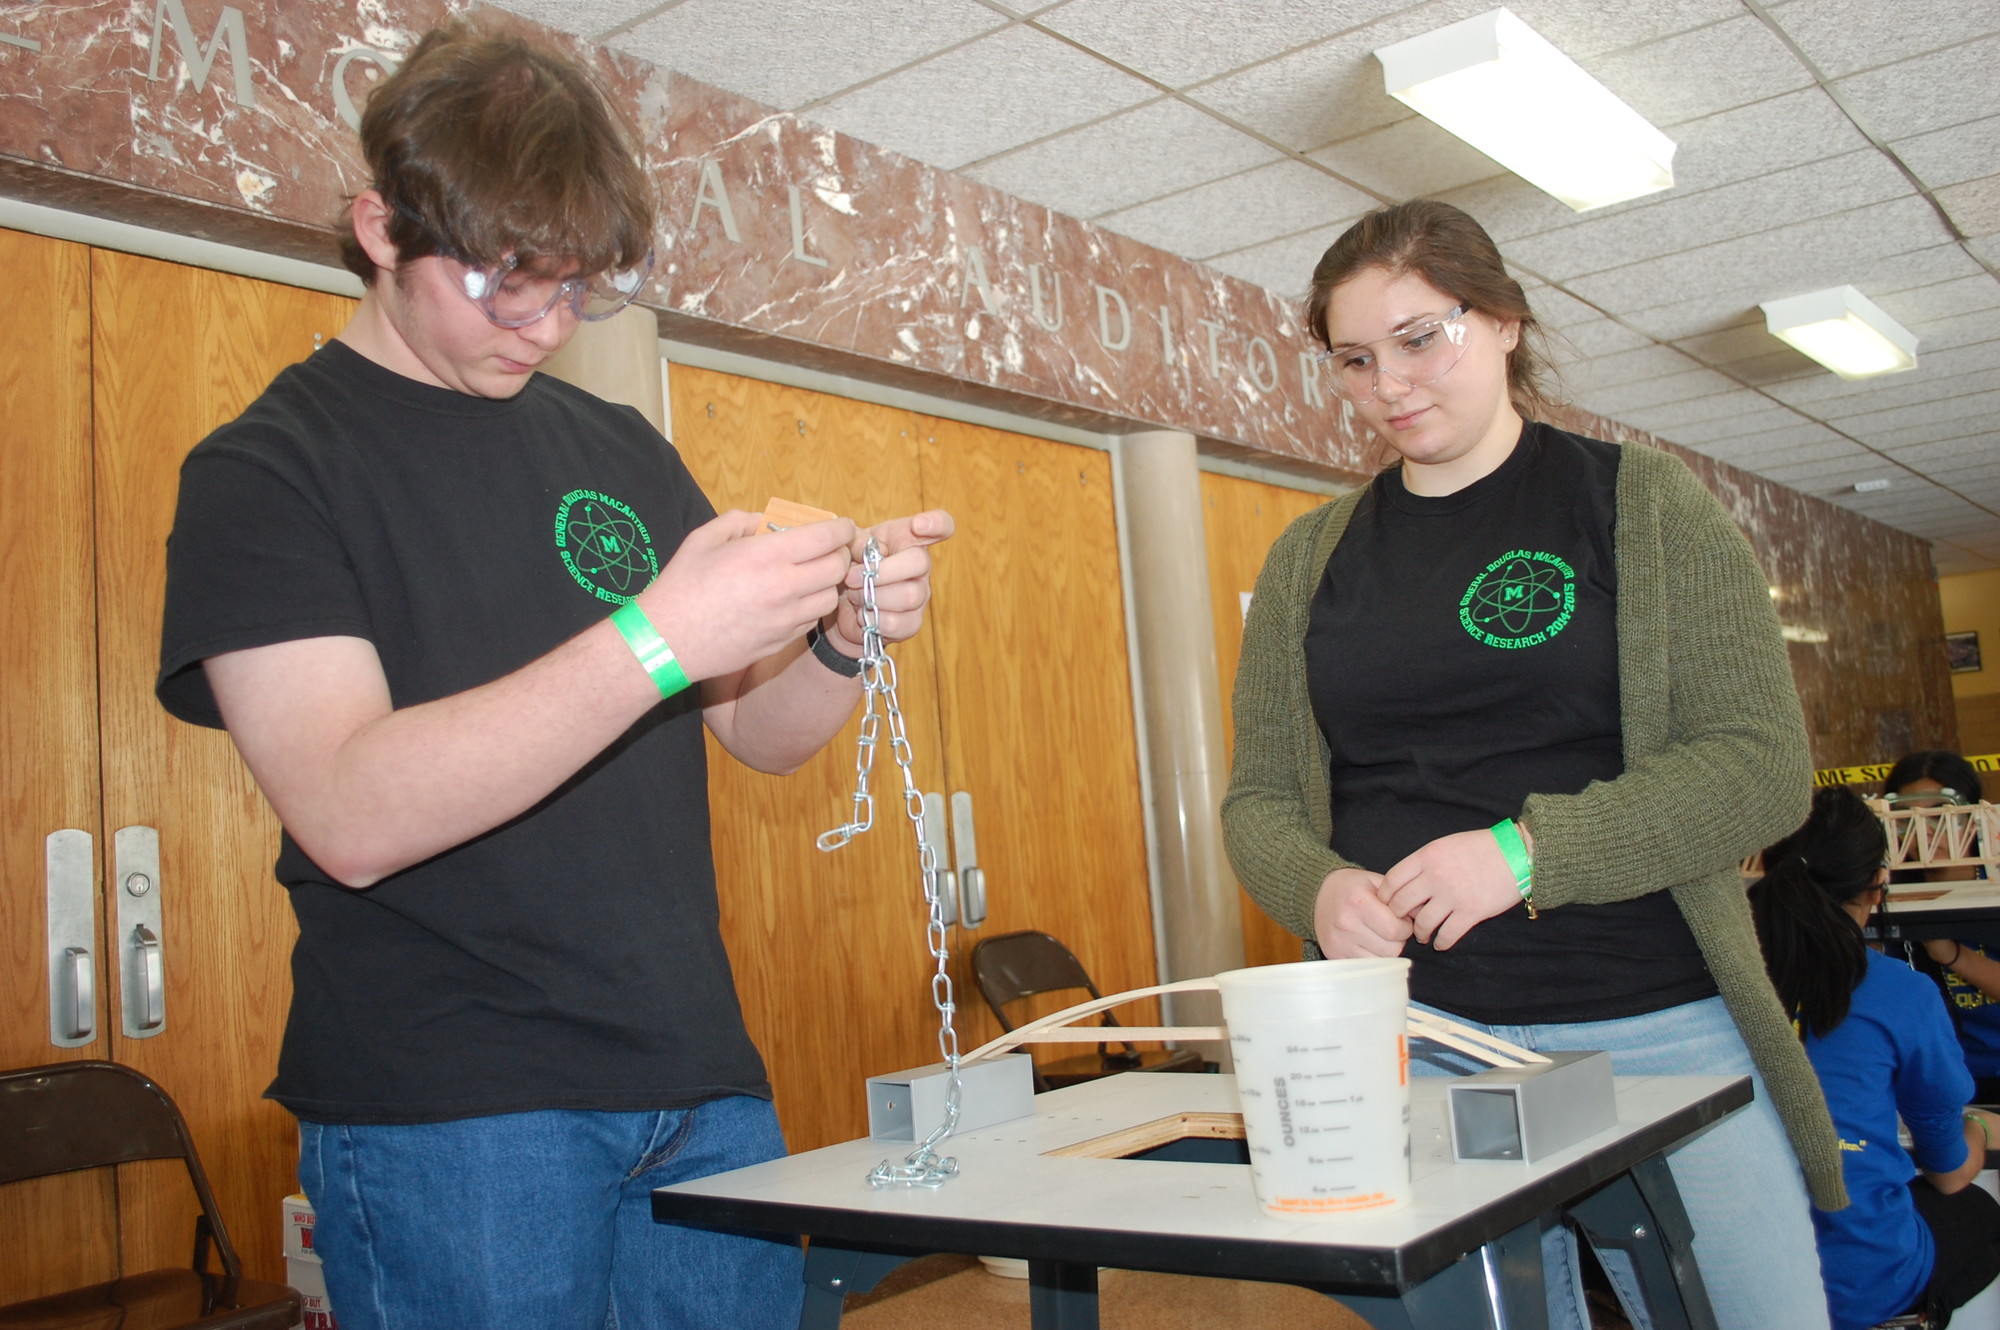 MacArthur students Max Richman and Sabrina Chasen prepared to test the durability of the wooden bridge they built.